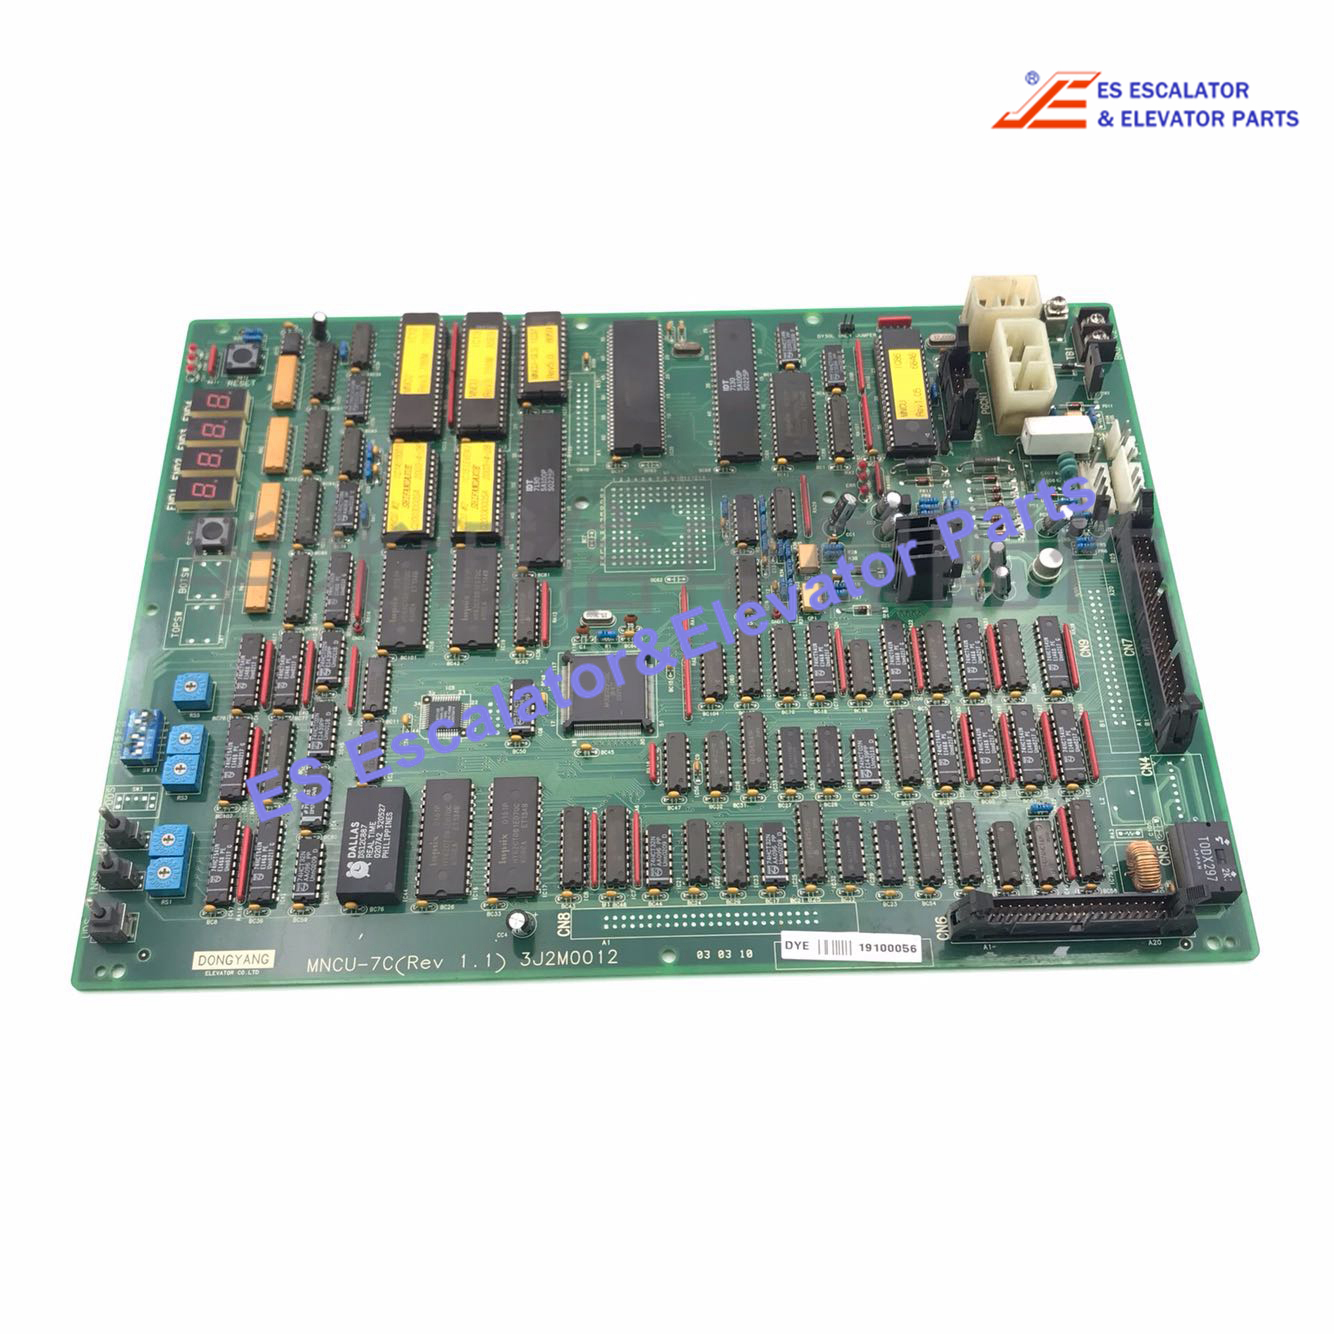 MNCU-2A Elevator Circuit board Use For Thyssen